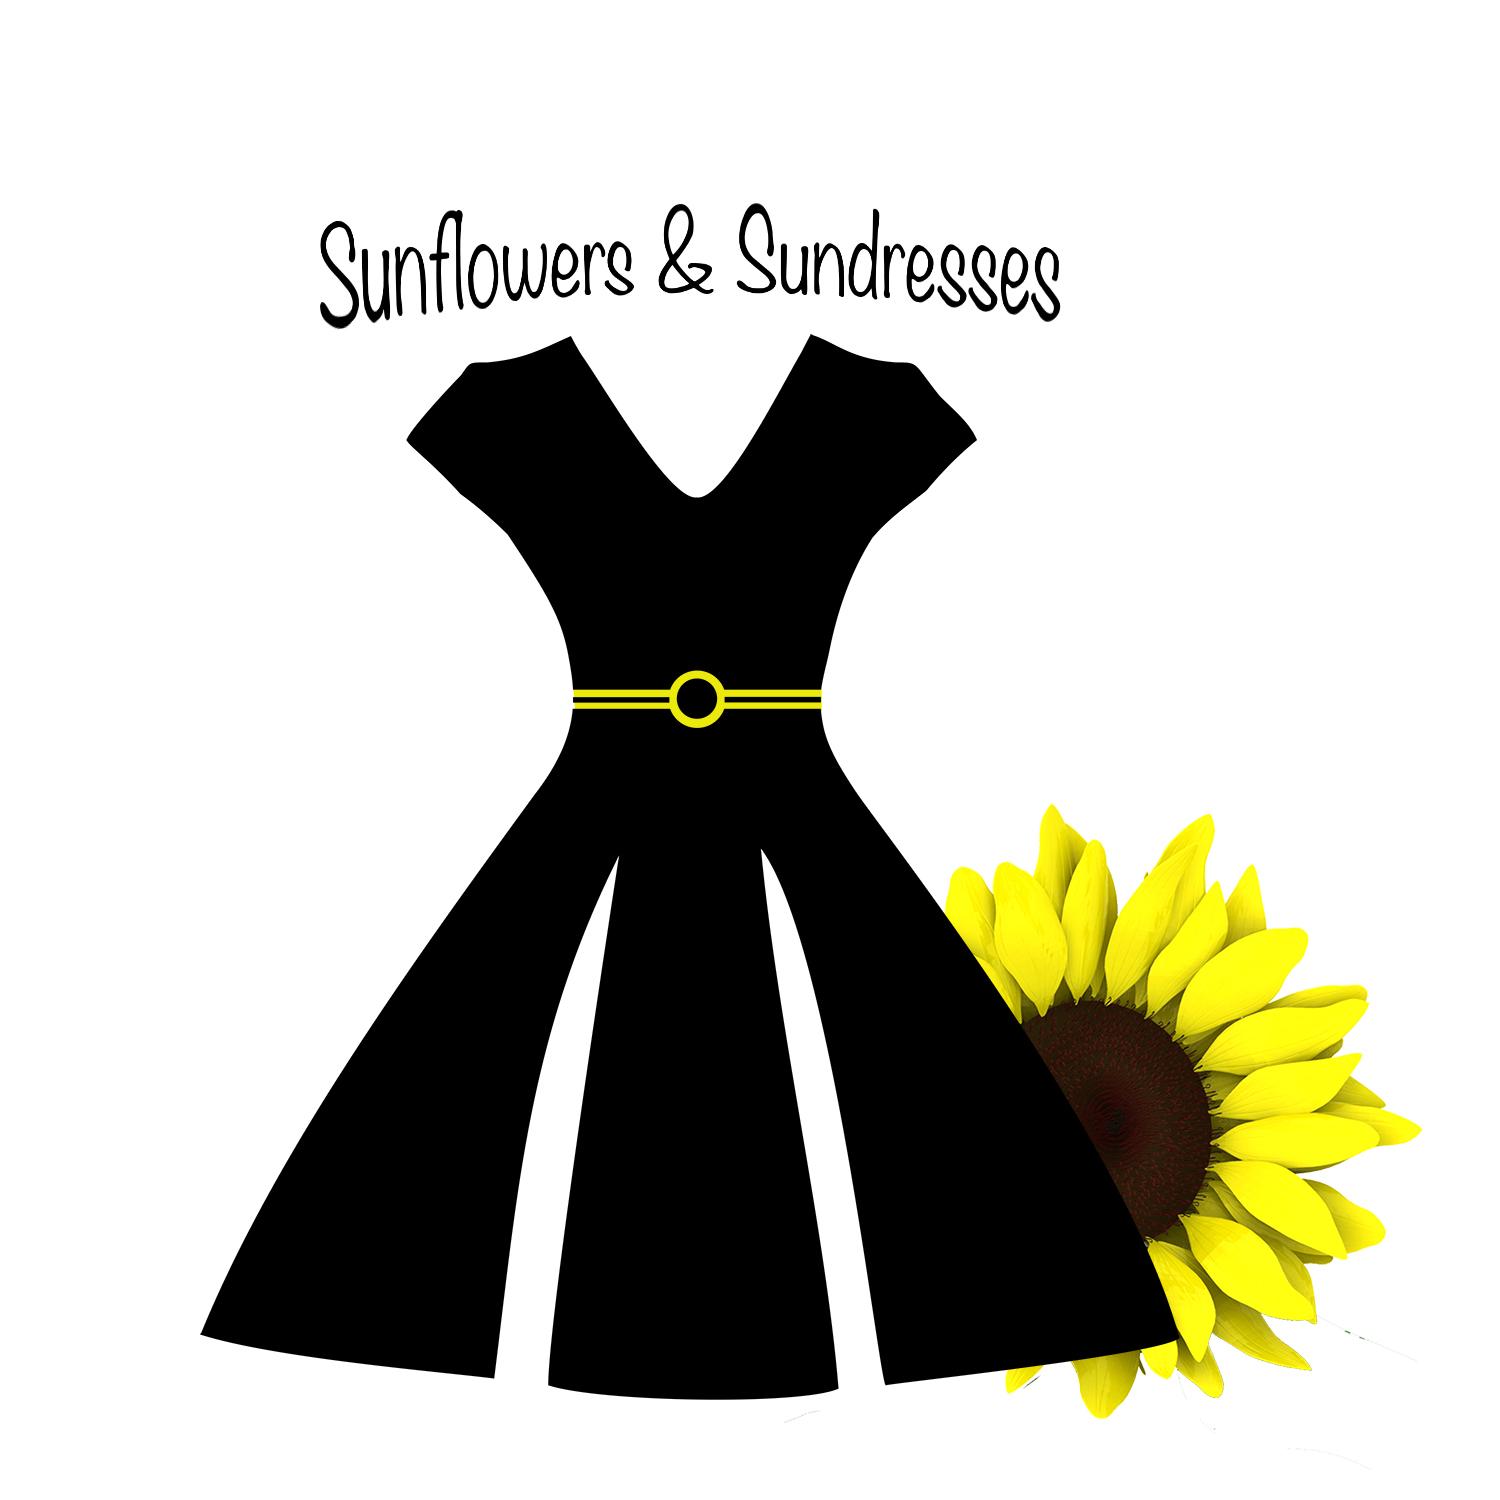 Sunflowers and Sundresses: Repeat offenders